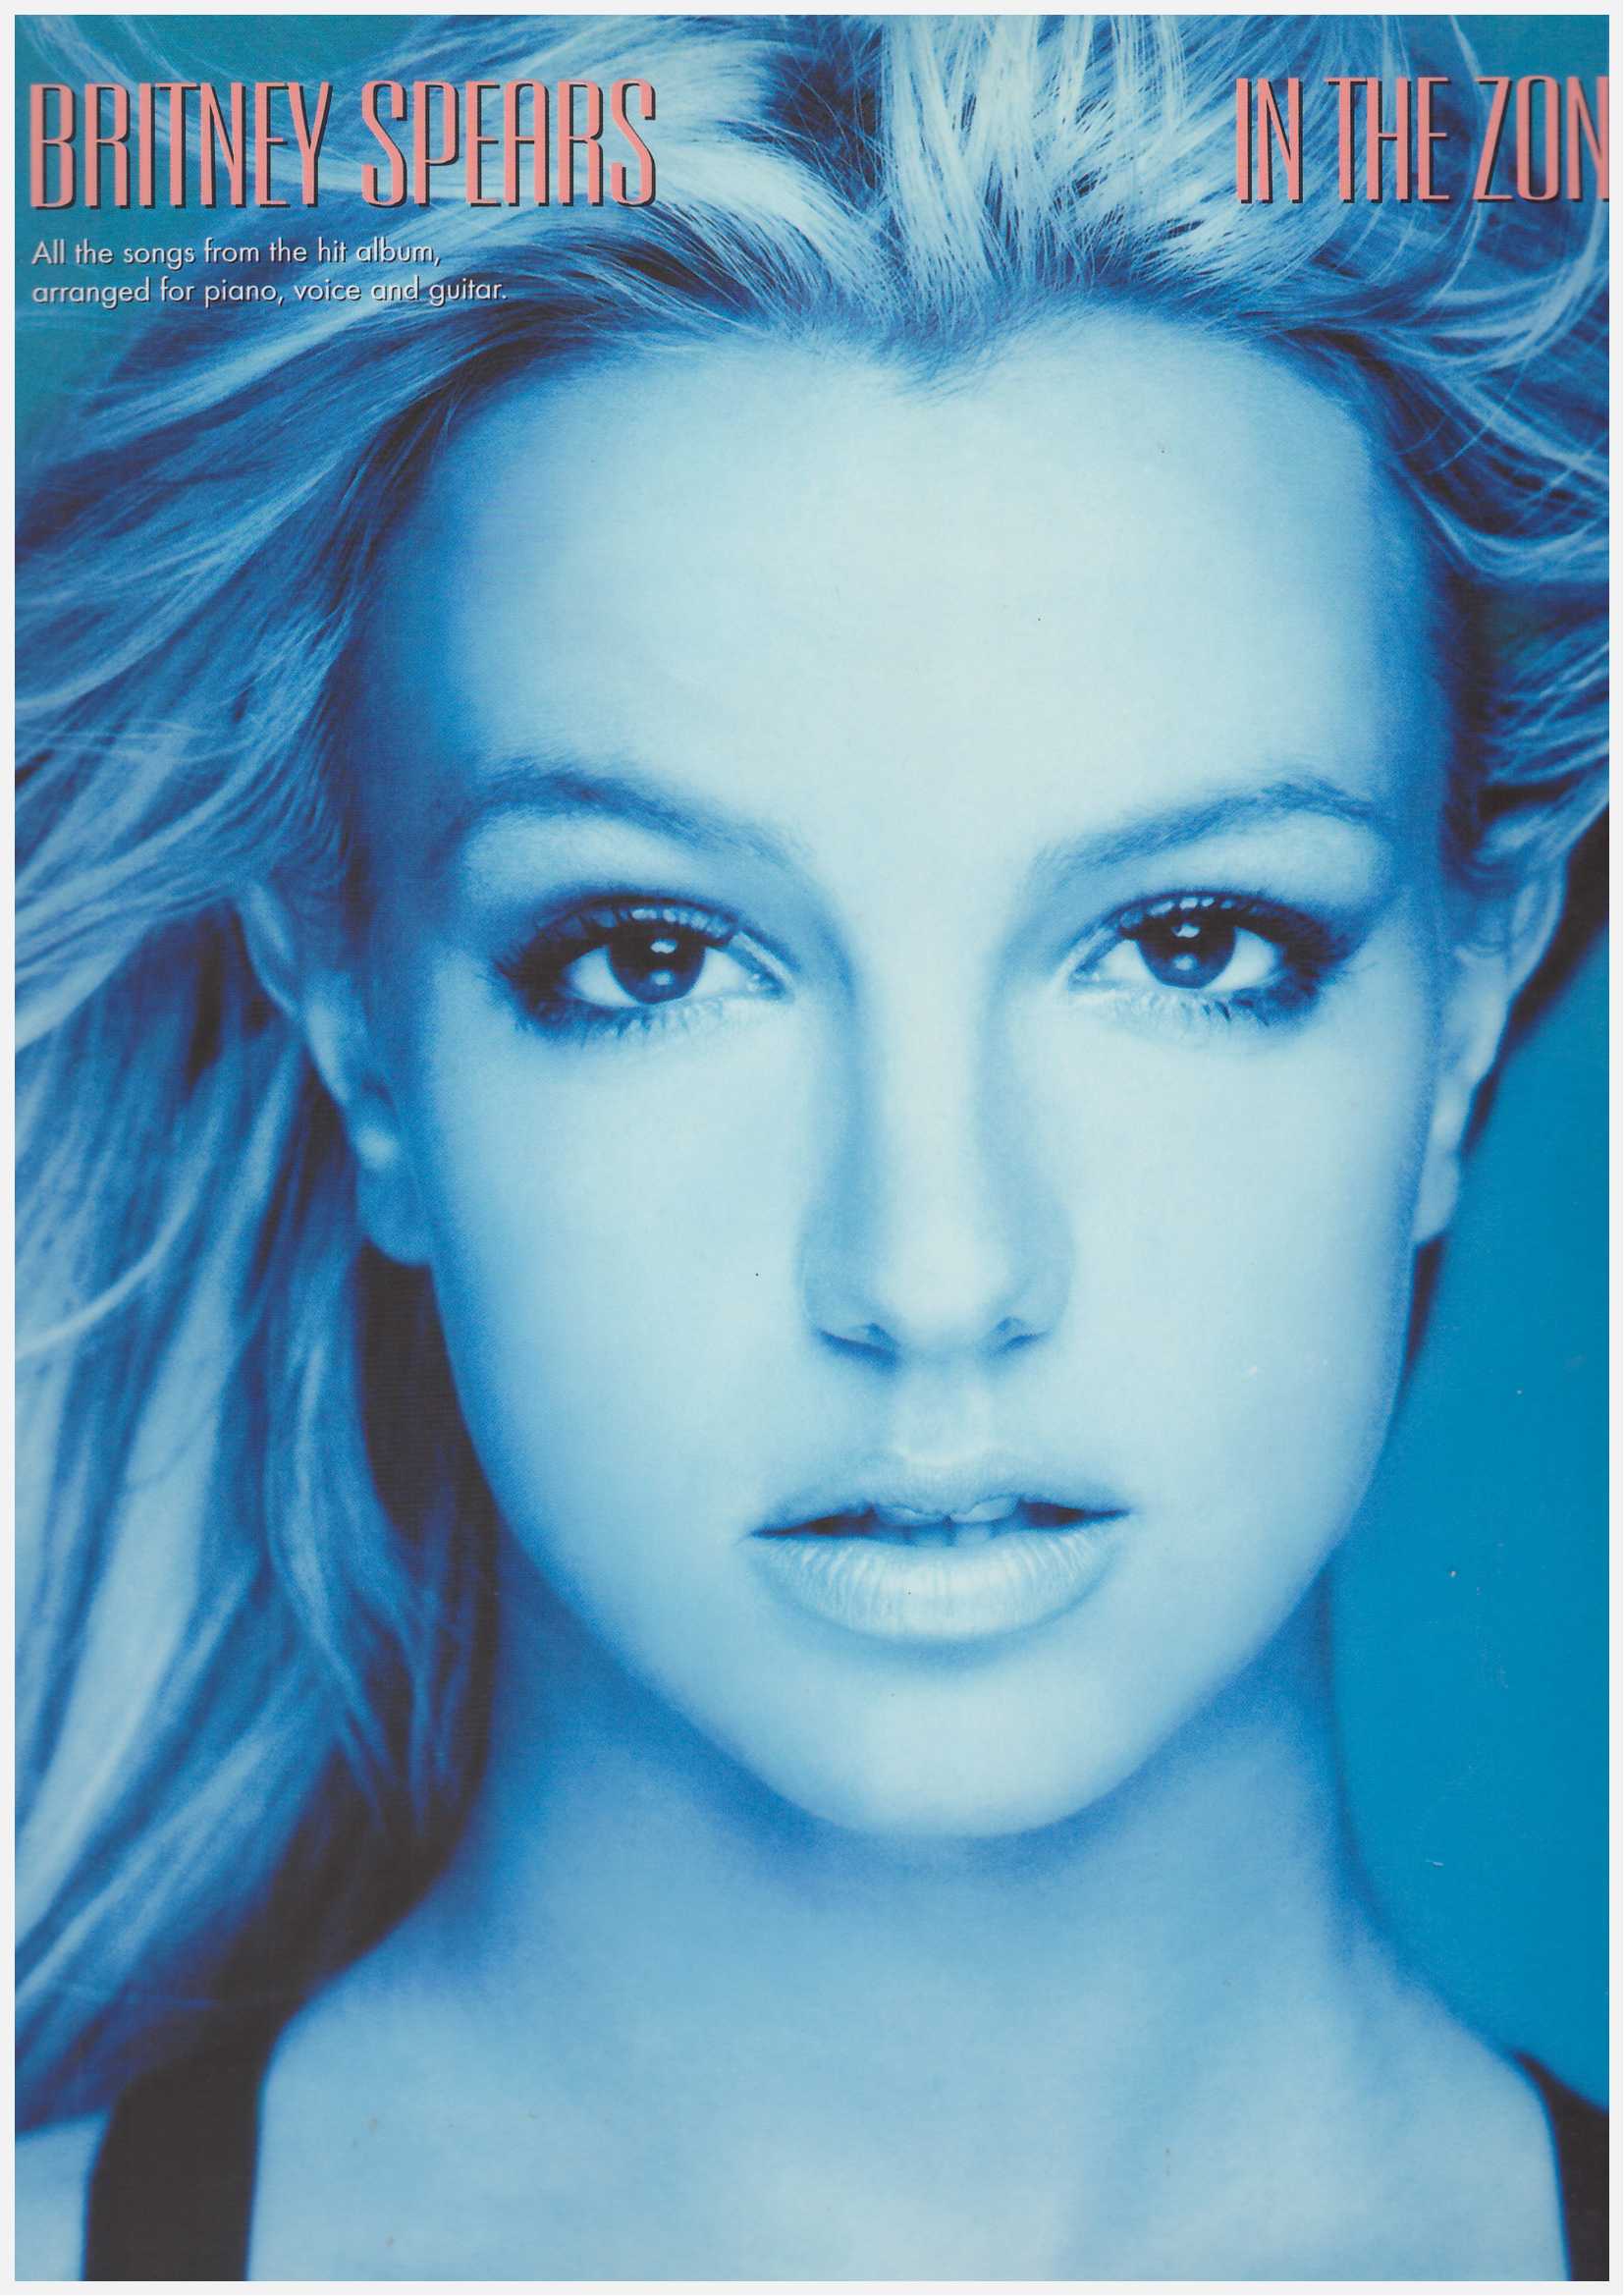 Britney Spears In The Zone / Pop Song Book / PVG Book / Piano Book / Vocal Book / Voice Book / Guitar Book / Gitar Book